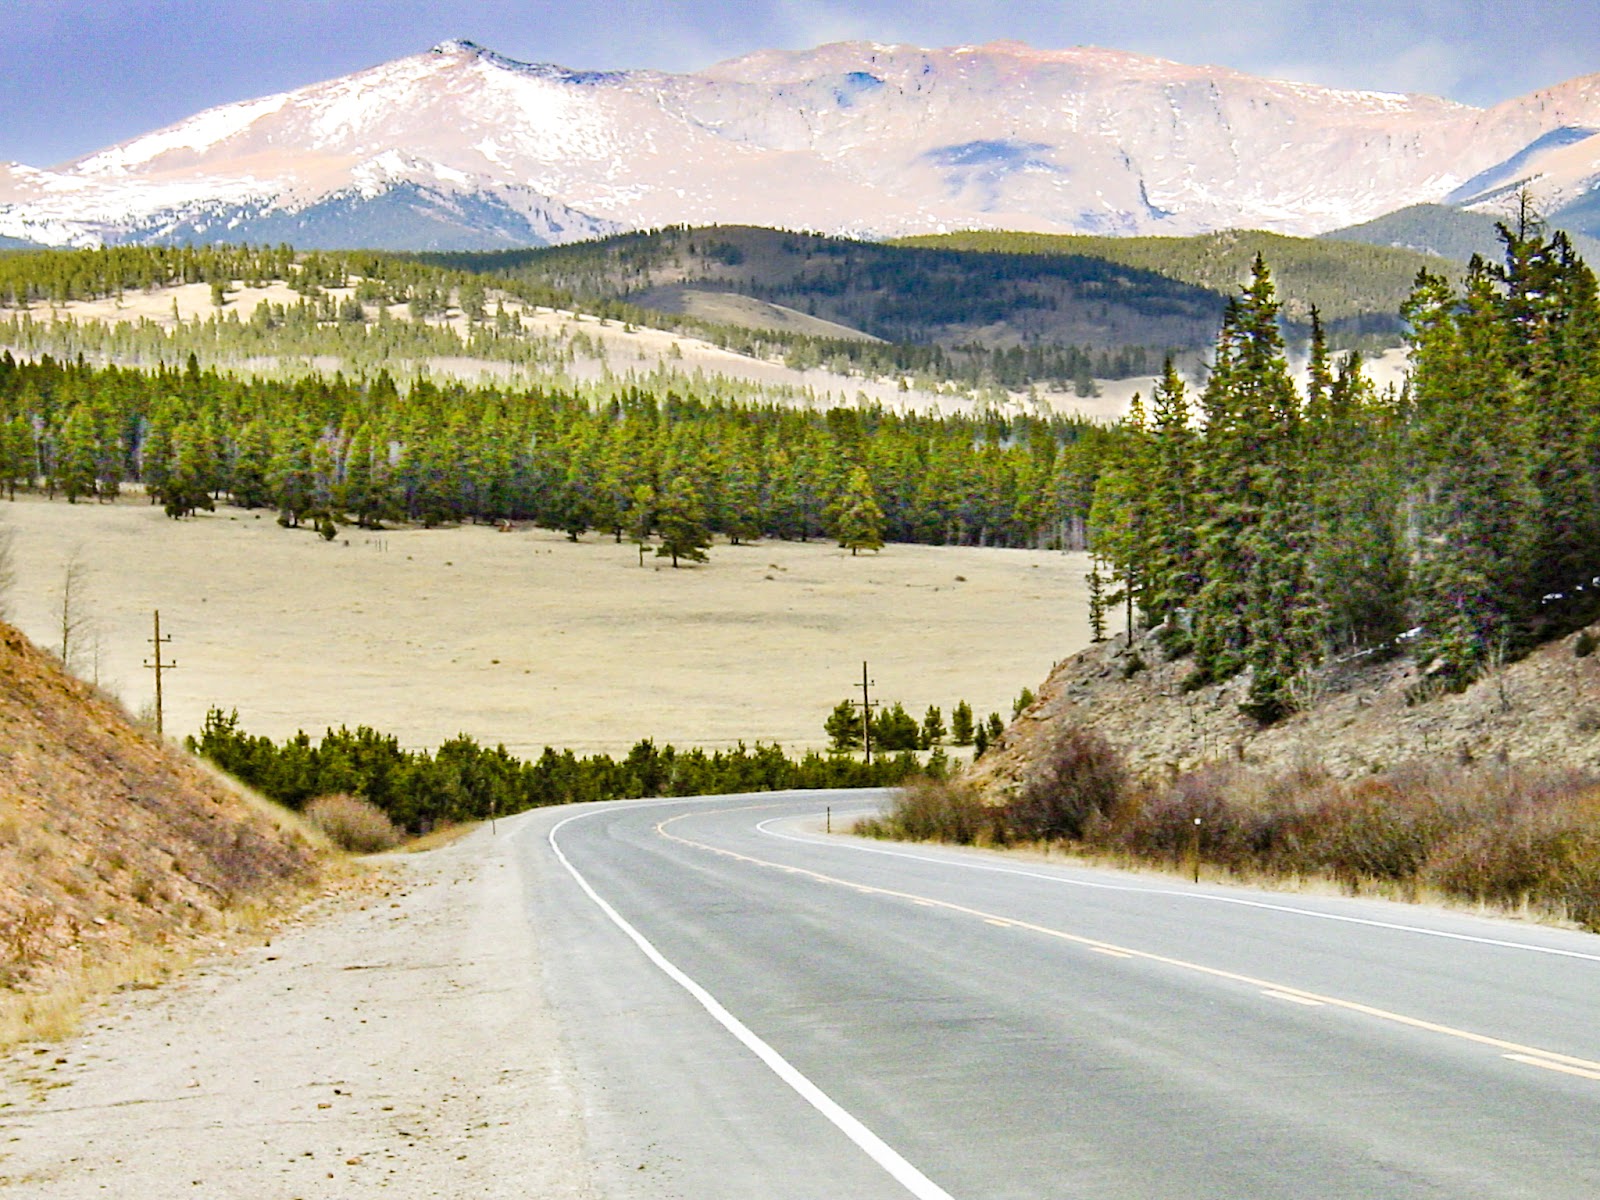 Road turns with snowy mountains in the distance. 